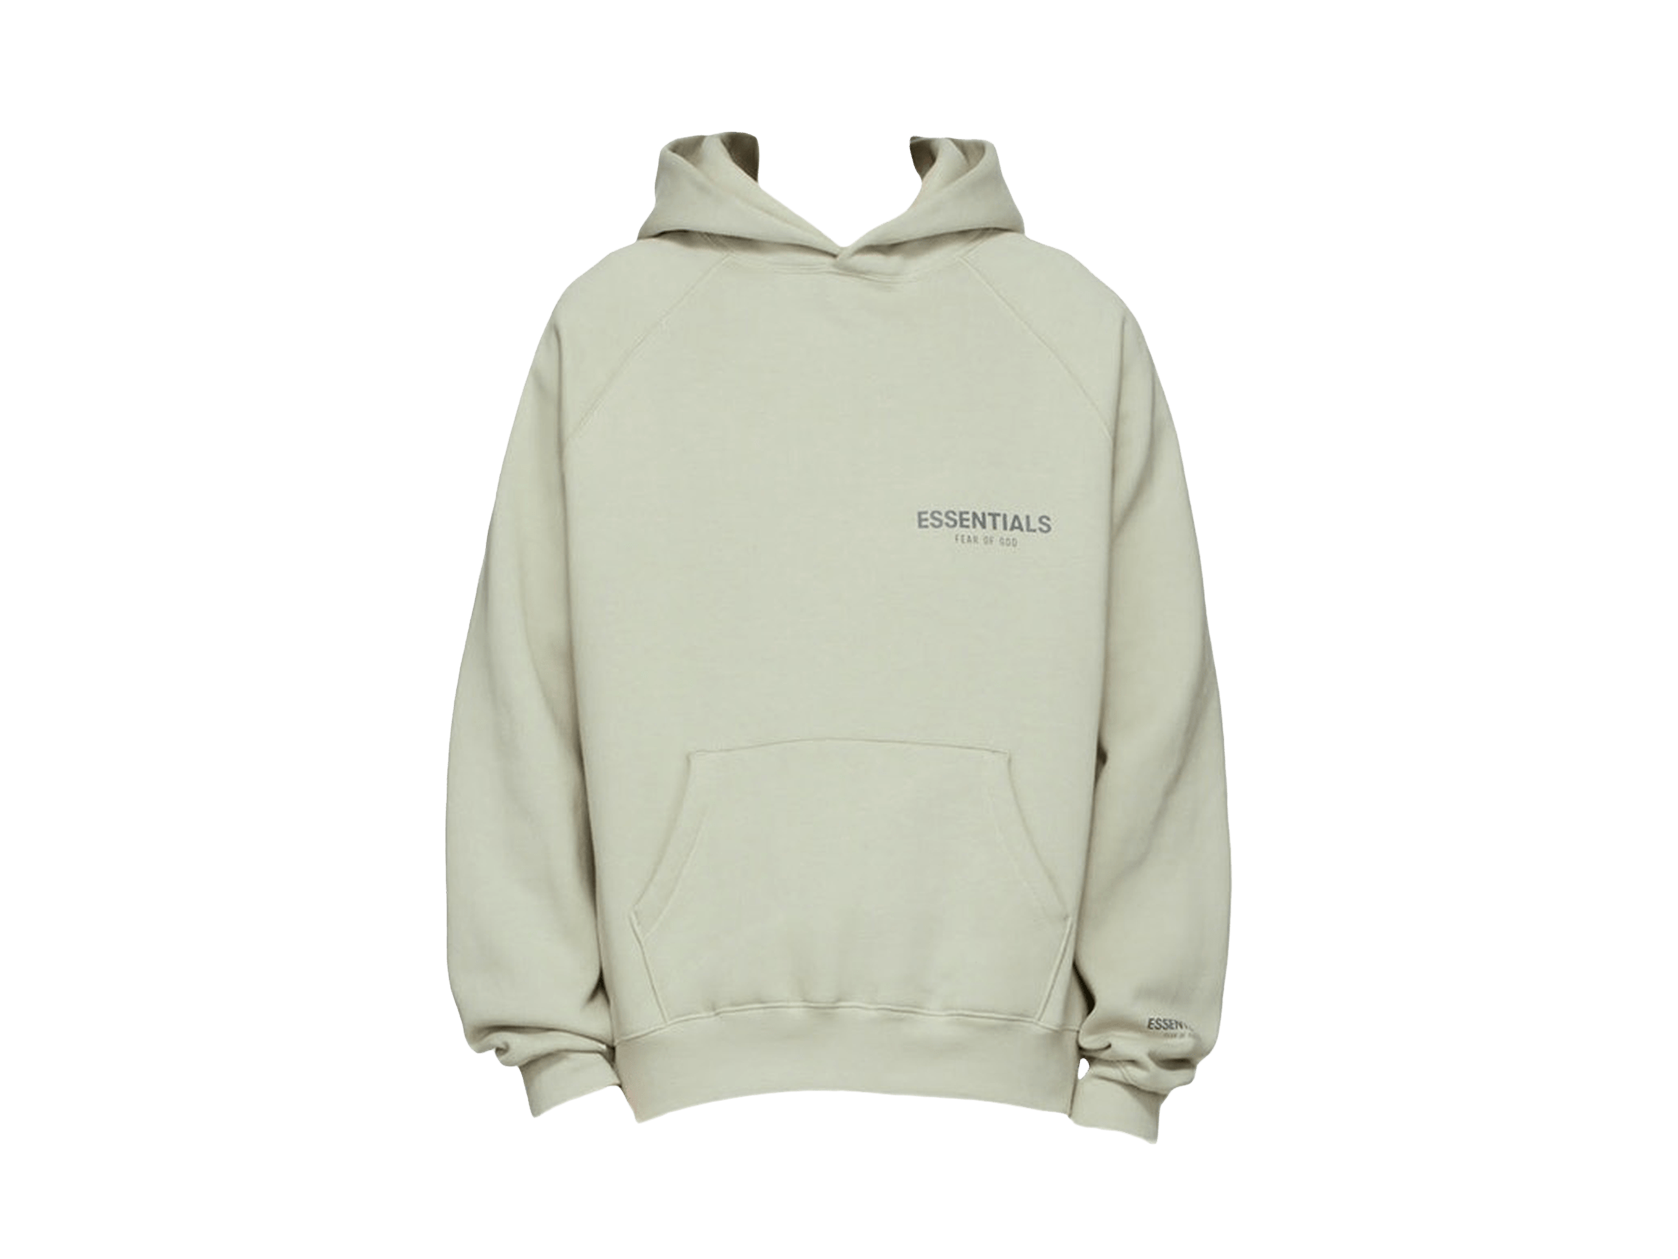 Double Boxed hoodie 159.99 FEAR OF GOD ESSENTIALS CORE PULLOVER HOODIE CONCRETE Double Boxed